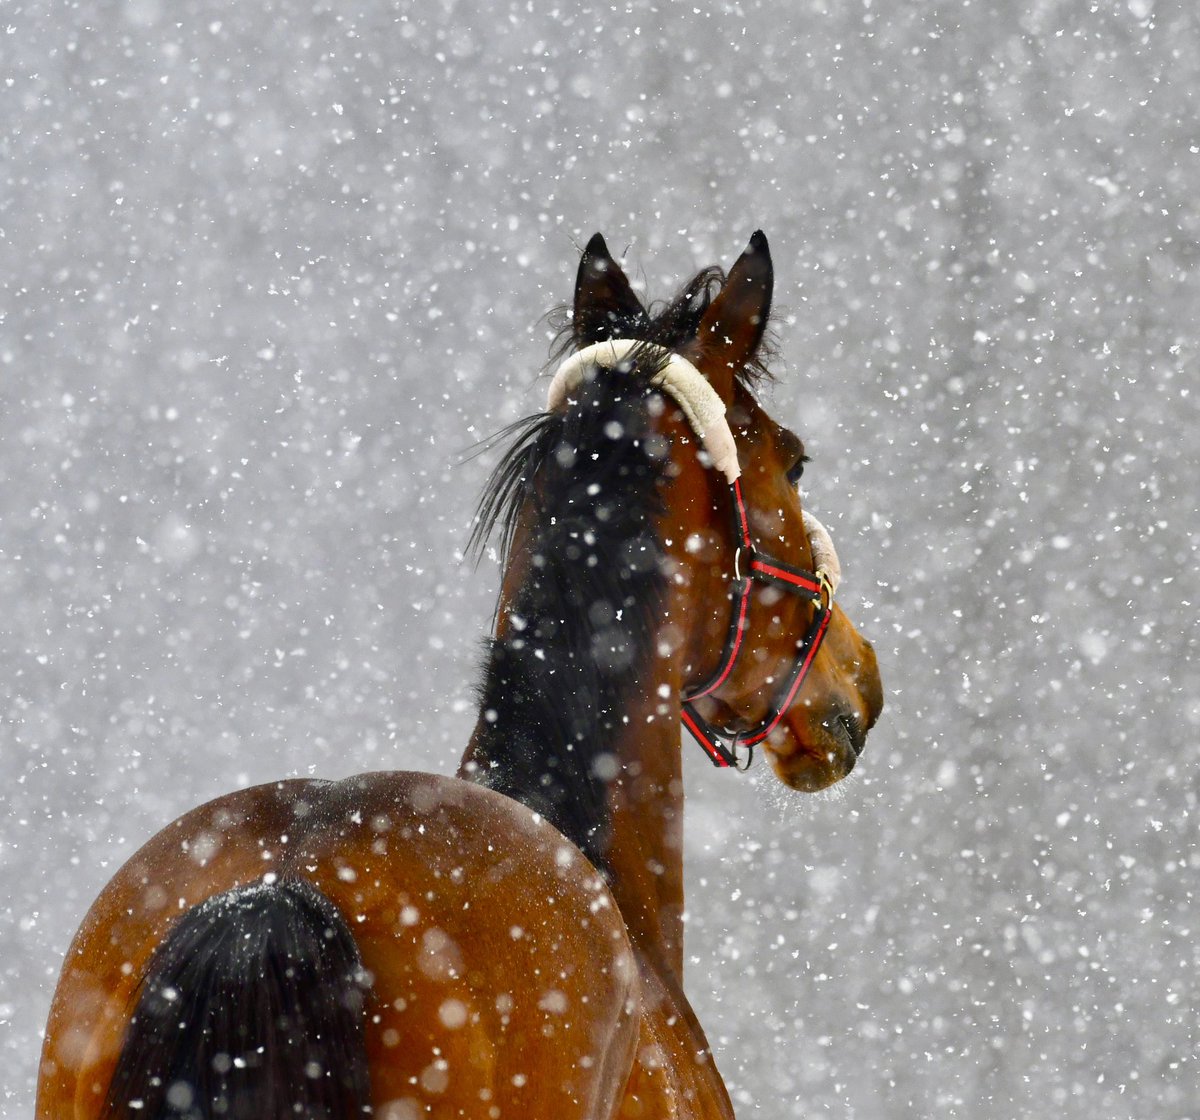 ❄️Another snow day is just another fun day for horses 😁…here’s @ladererstables tough NY competitor LADY MILAGRO enjoying the quiet of this morning’s snowfall ⛄️